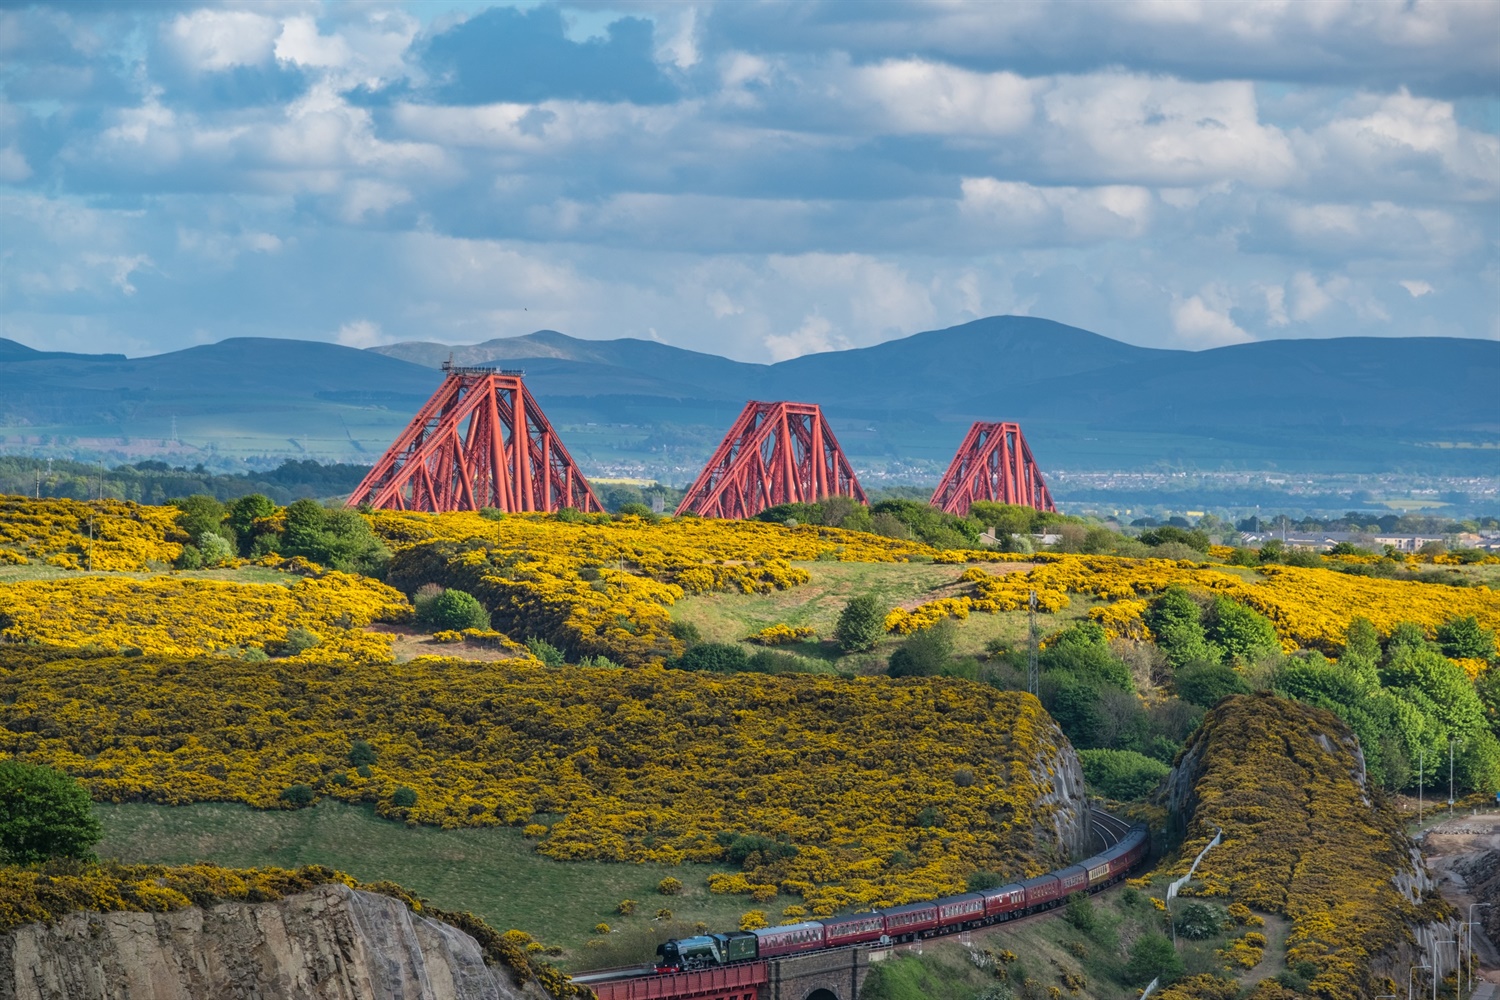 Steam locomotion returns to Borders Railway for summer